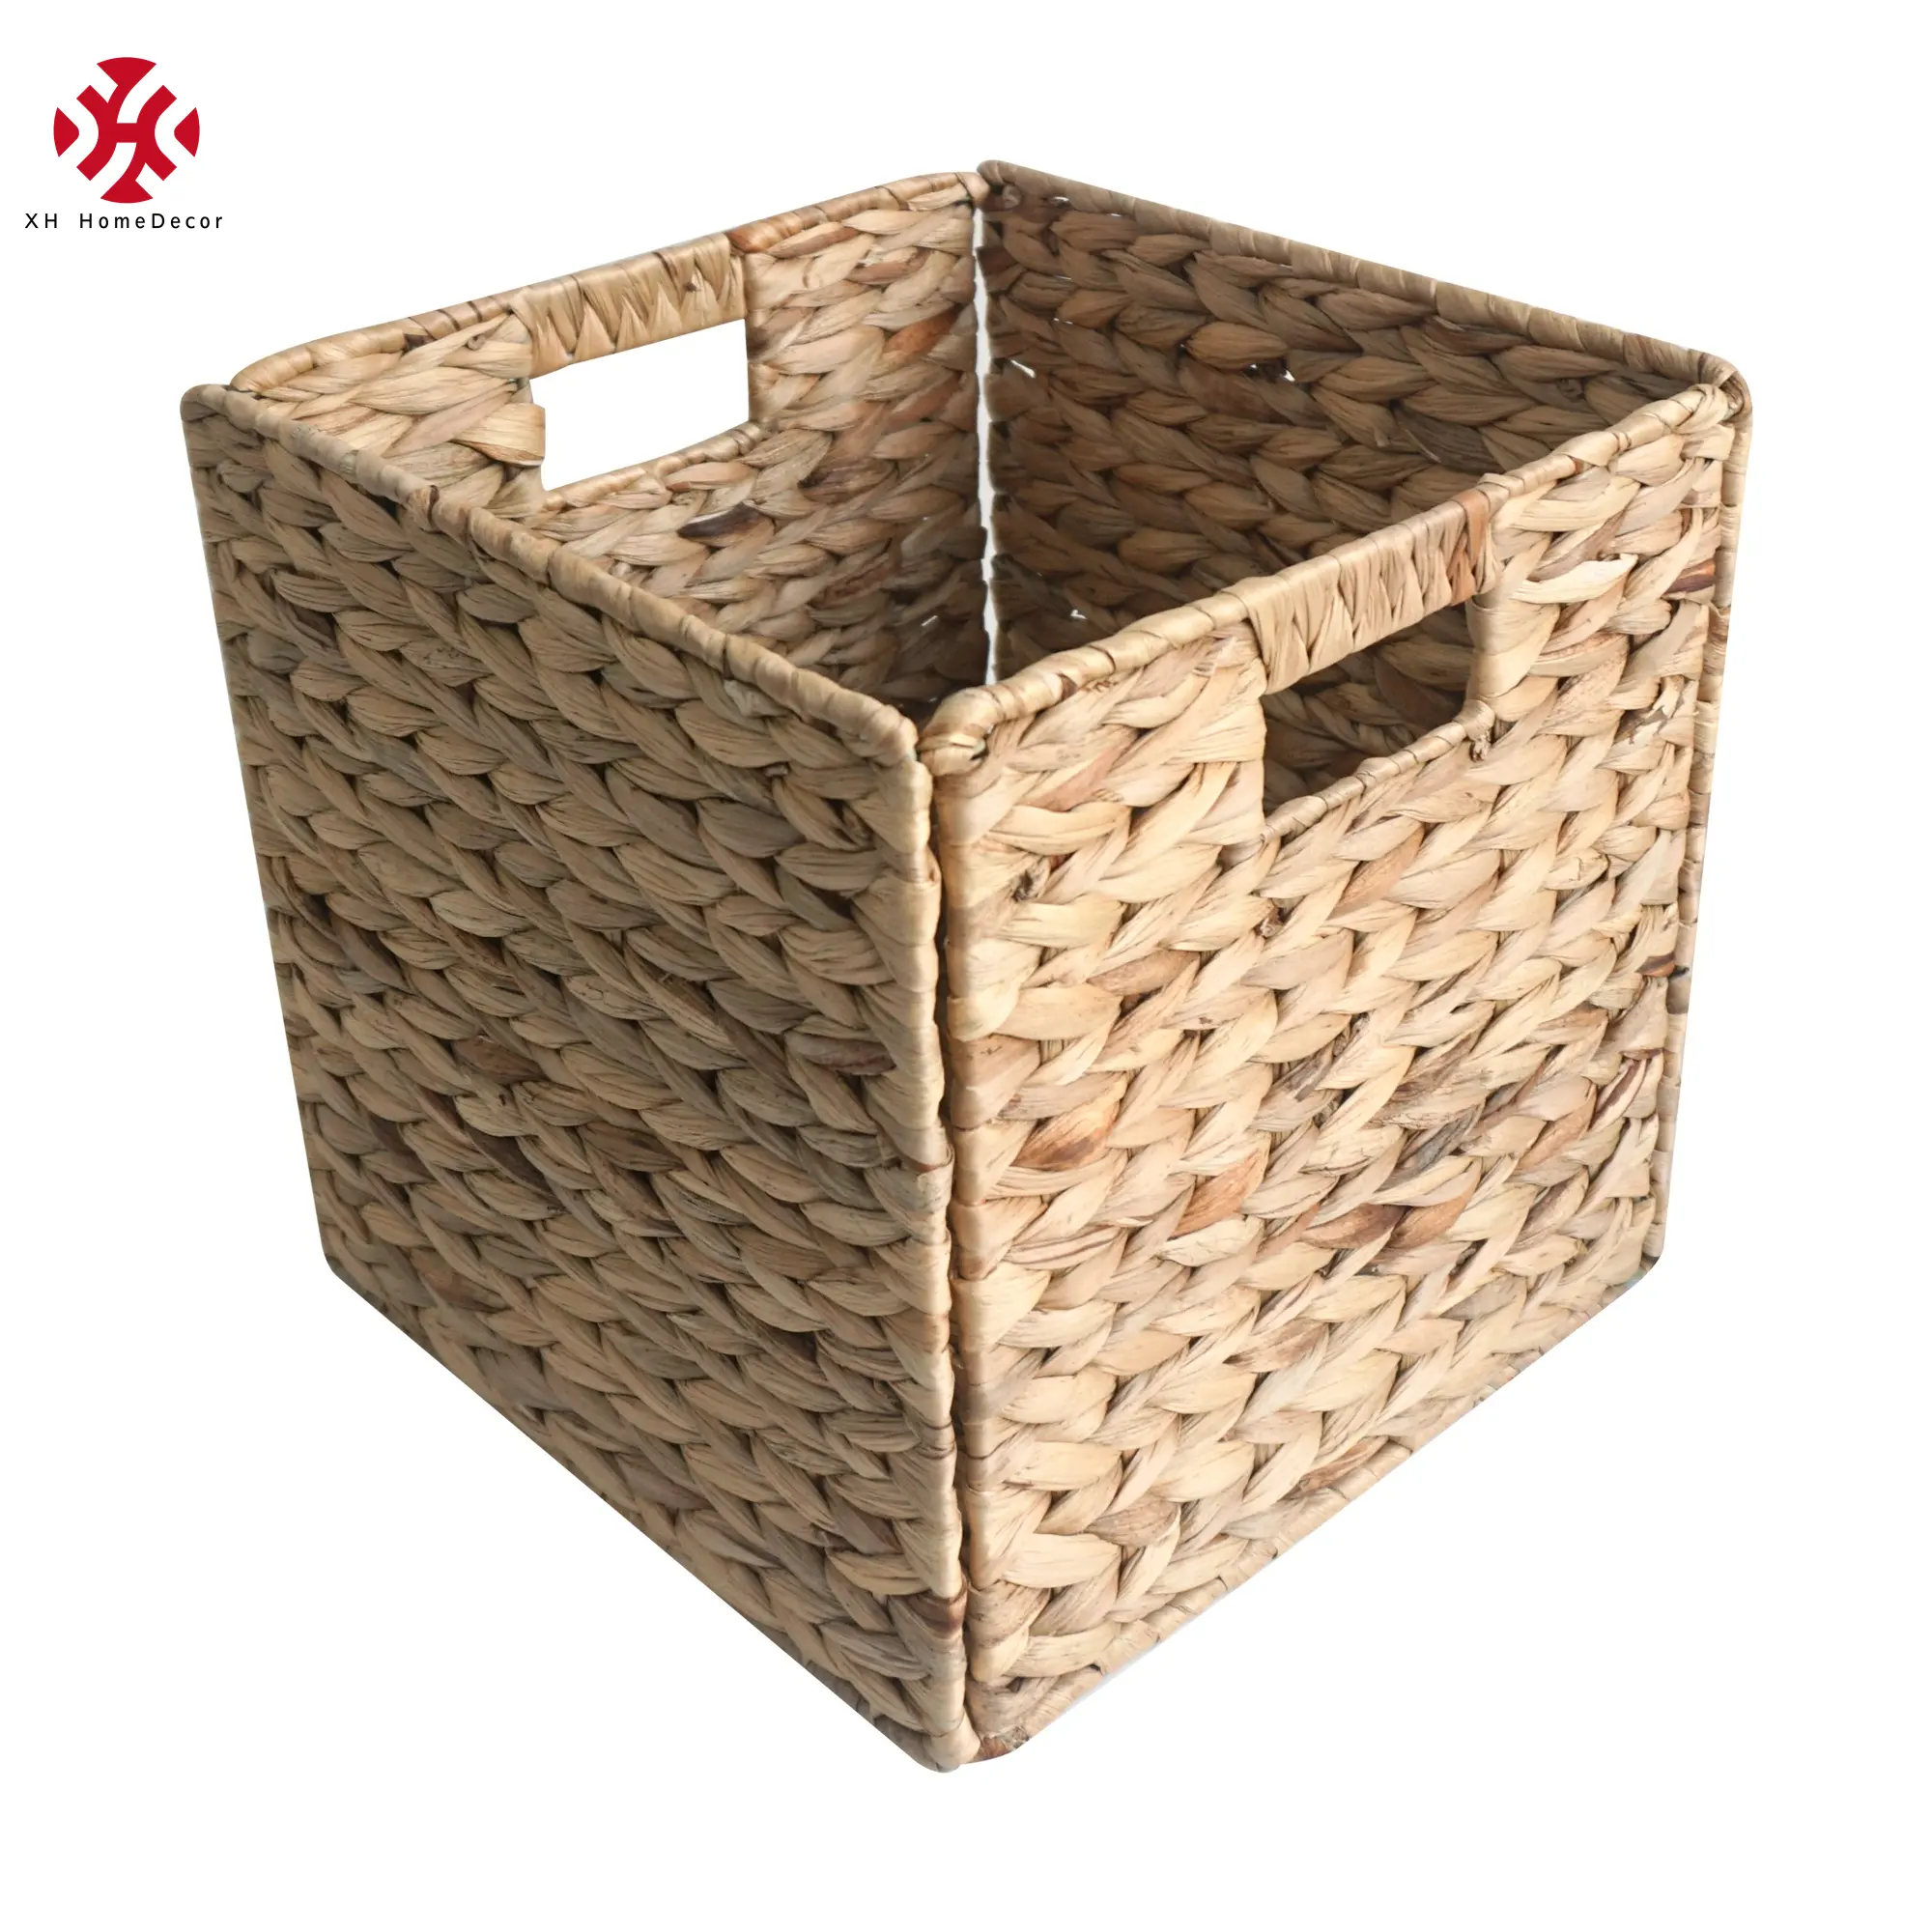 XH 12 Inch Square woven Foldable Natural Water Hyacinth under shelf Storage Basket laundry Collapsible Cube Boxes